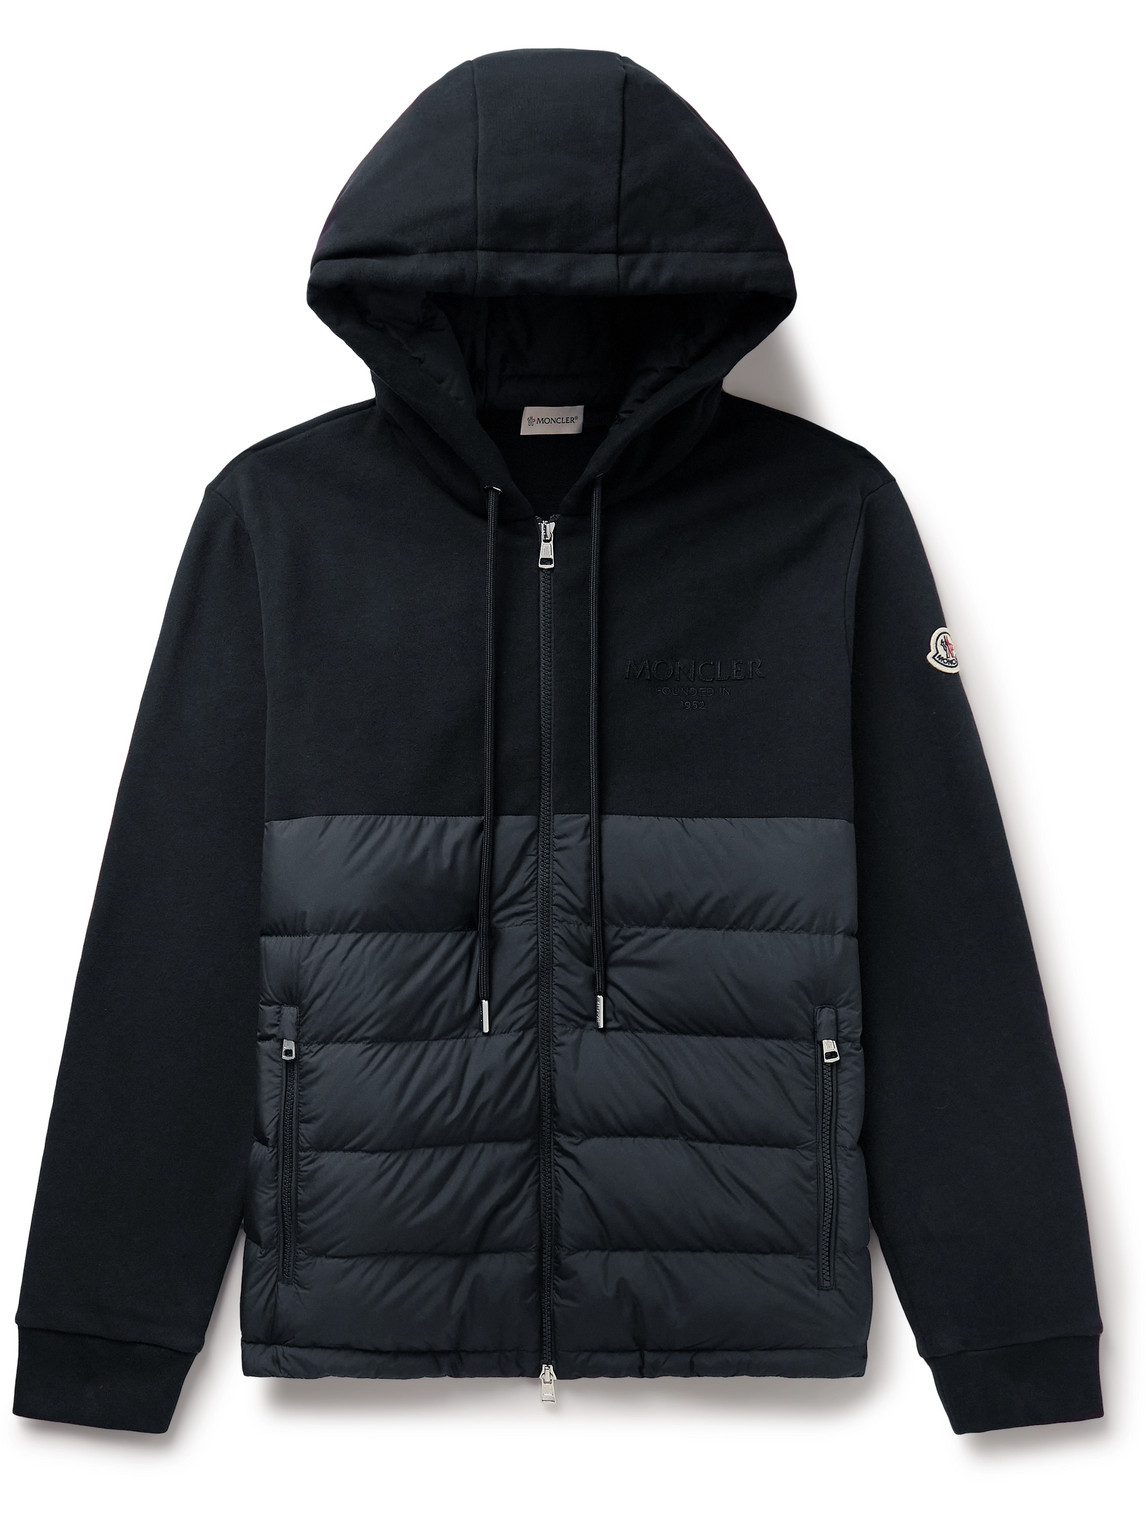 Moncler - Logo-Appliquéd Panelled Cotton-Jersey and Quilted Shell Down Zip-Up Hoodie - Men - Blue - XXL von Moncler